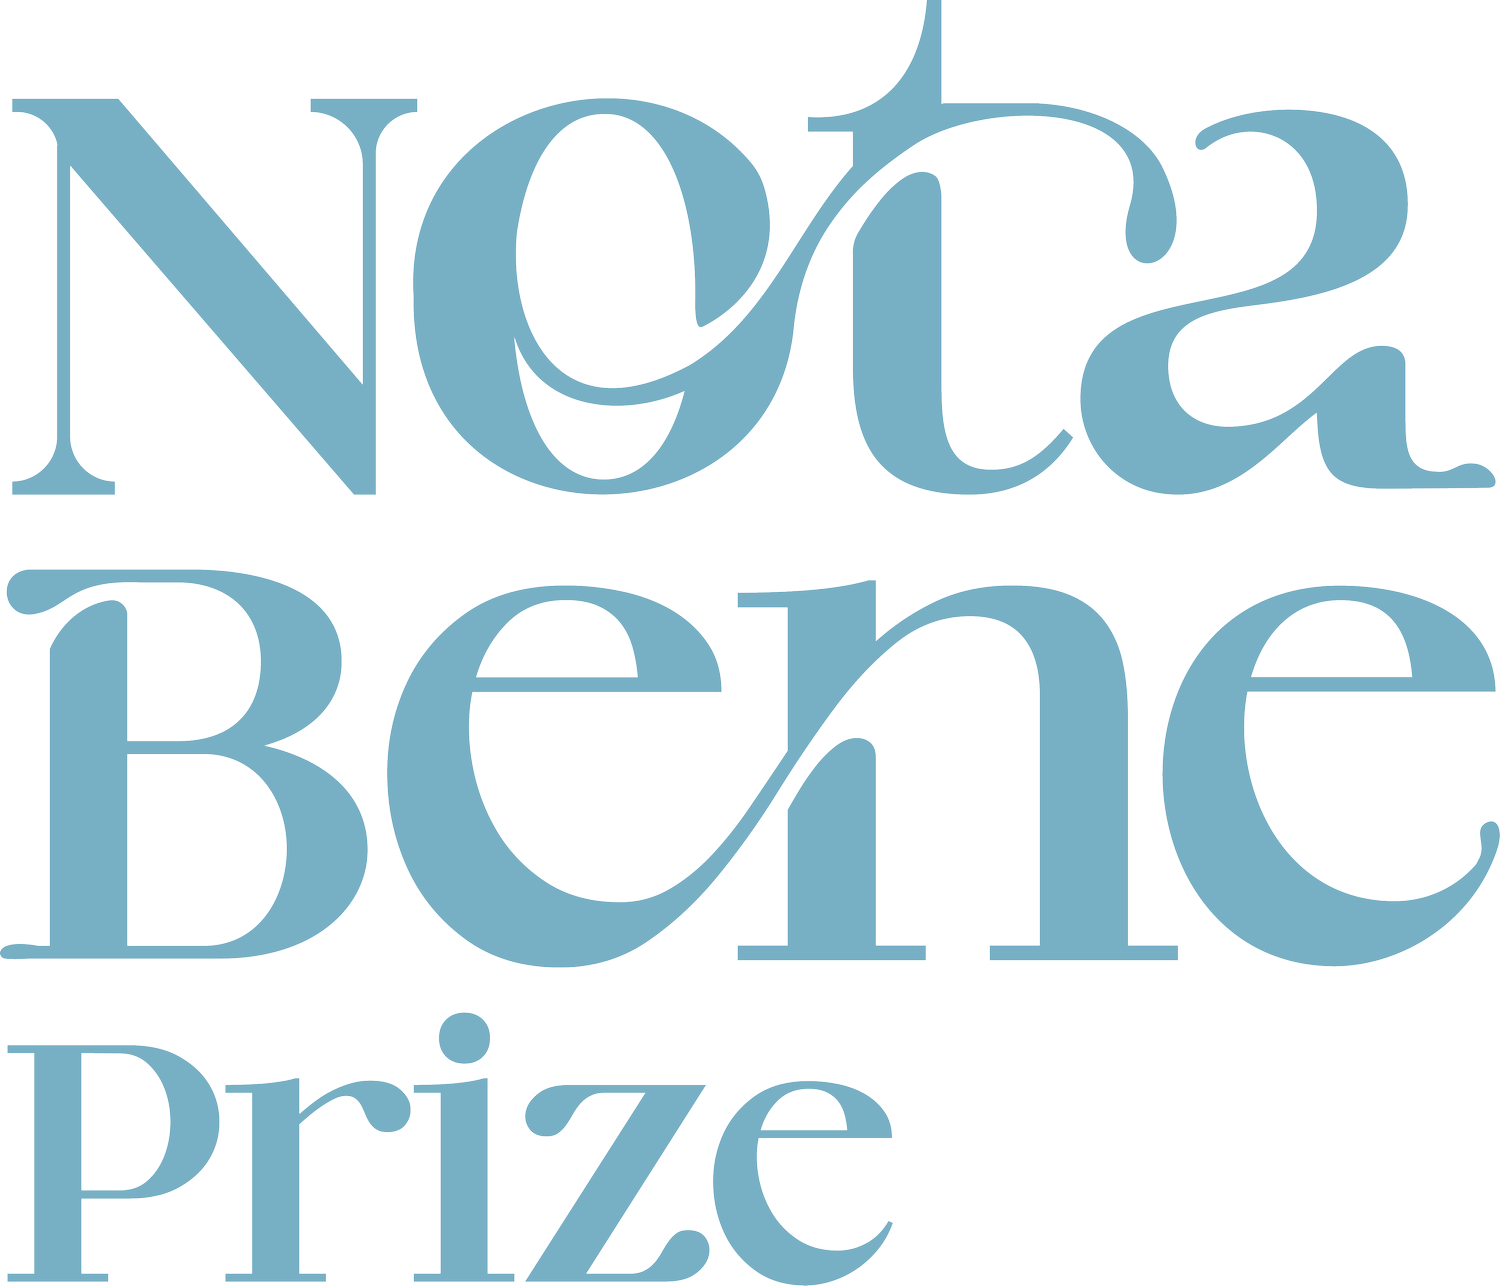  Four Granta Titles Longlisted for the Nota Bene Prize